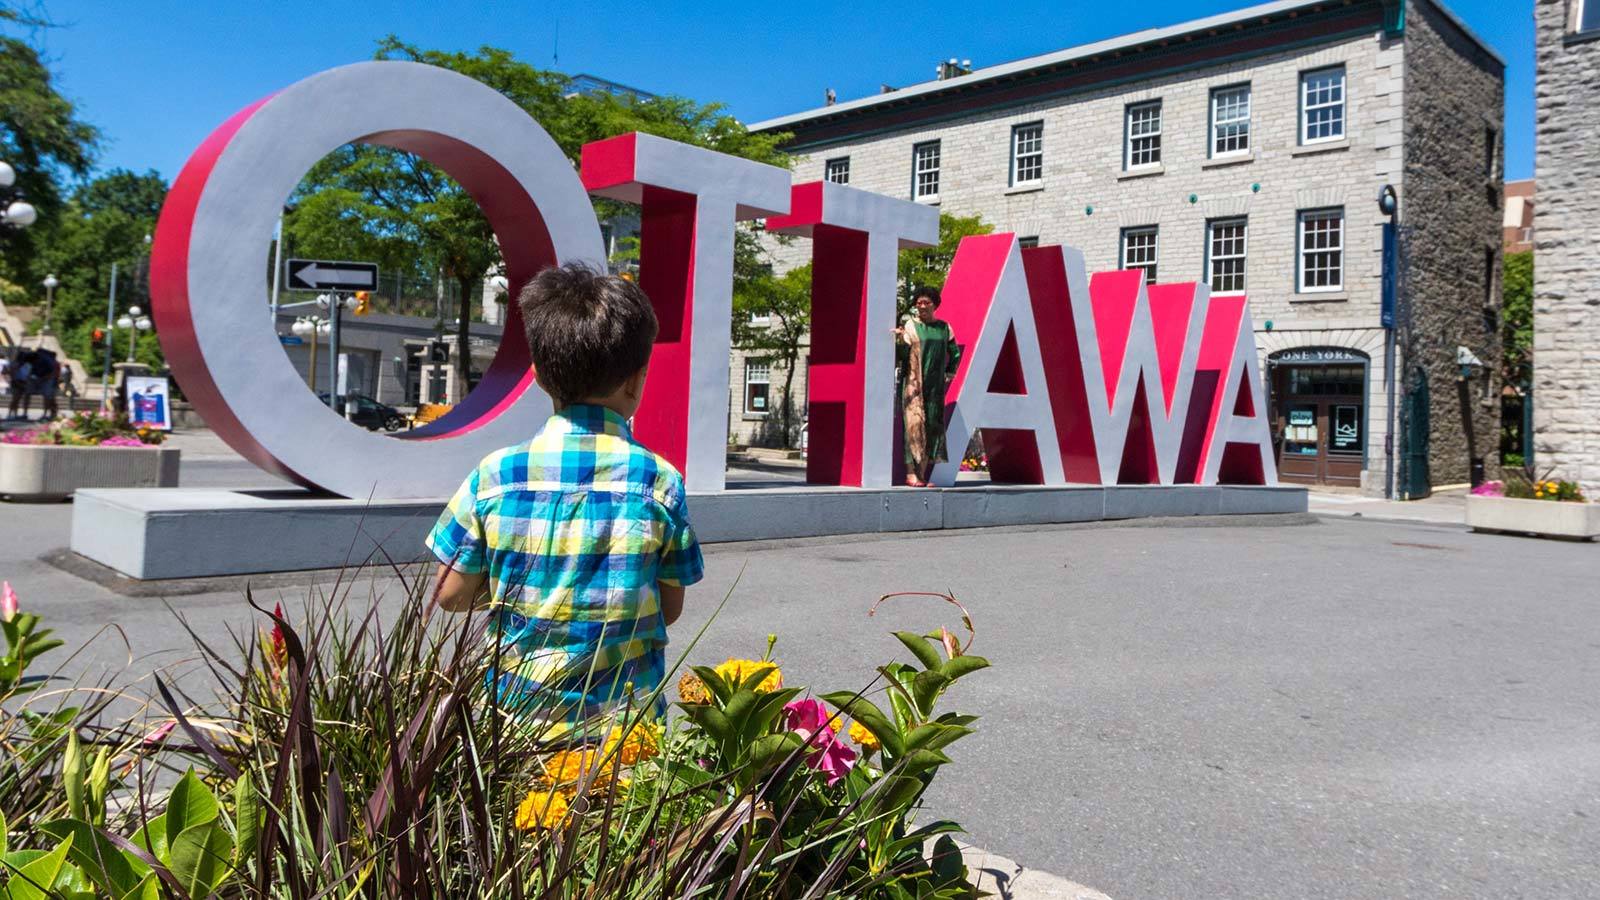 Things to do in Ottawa with kids